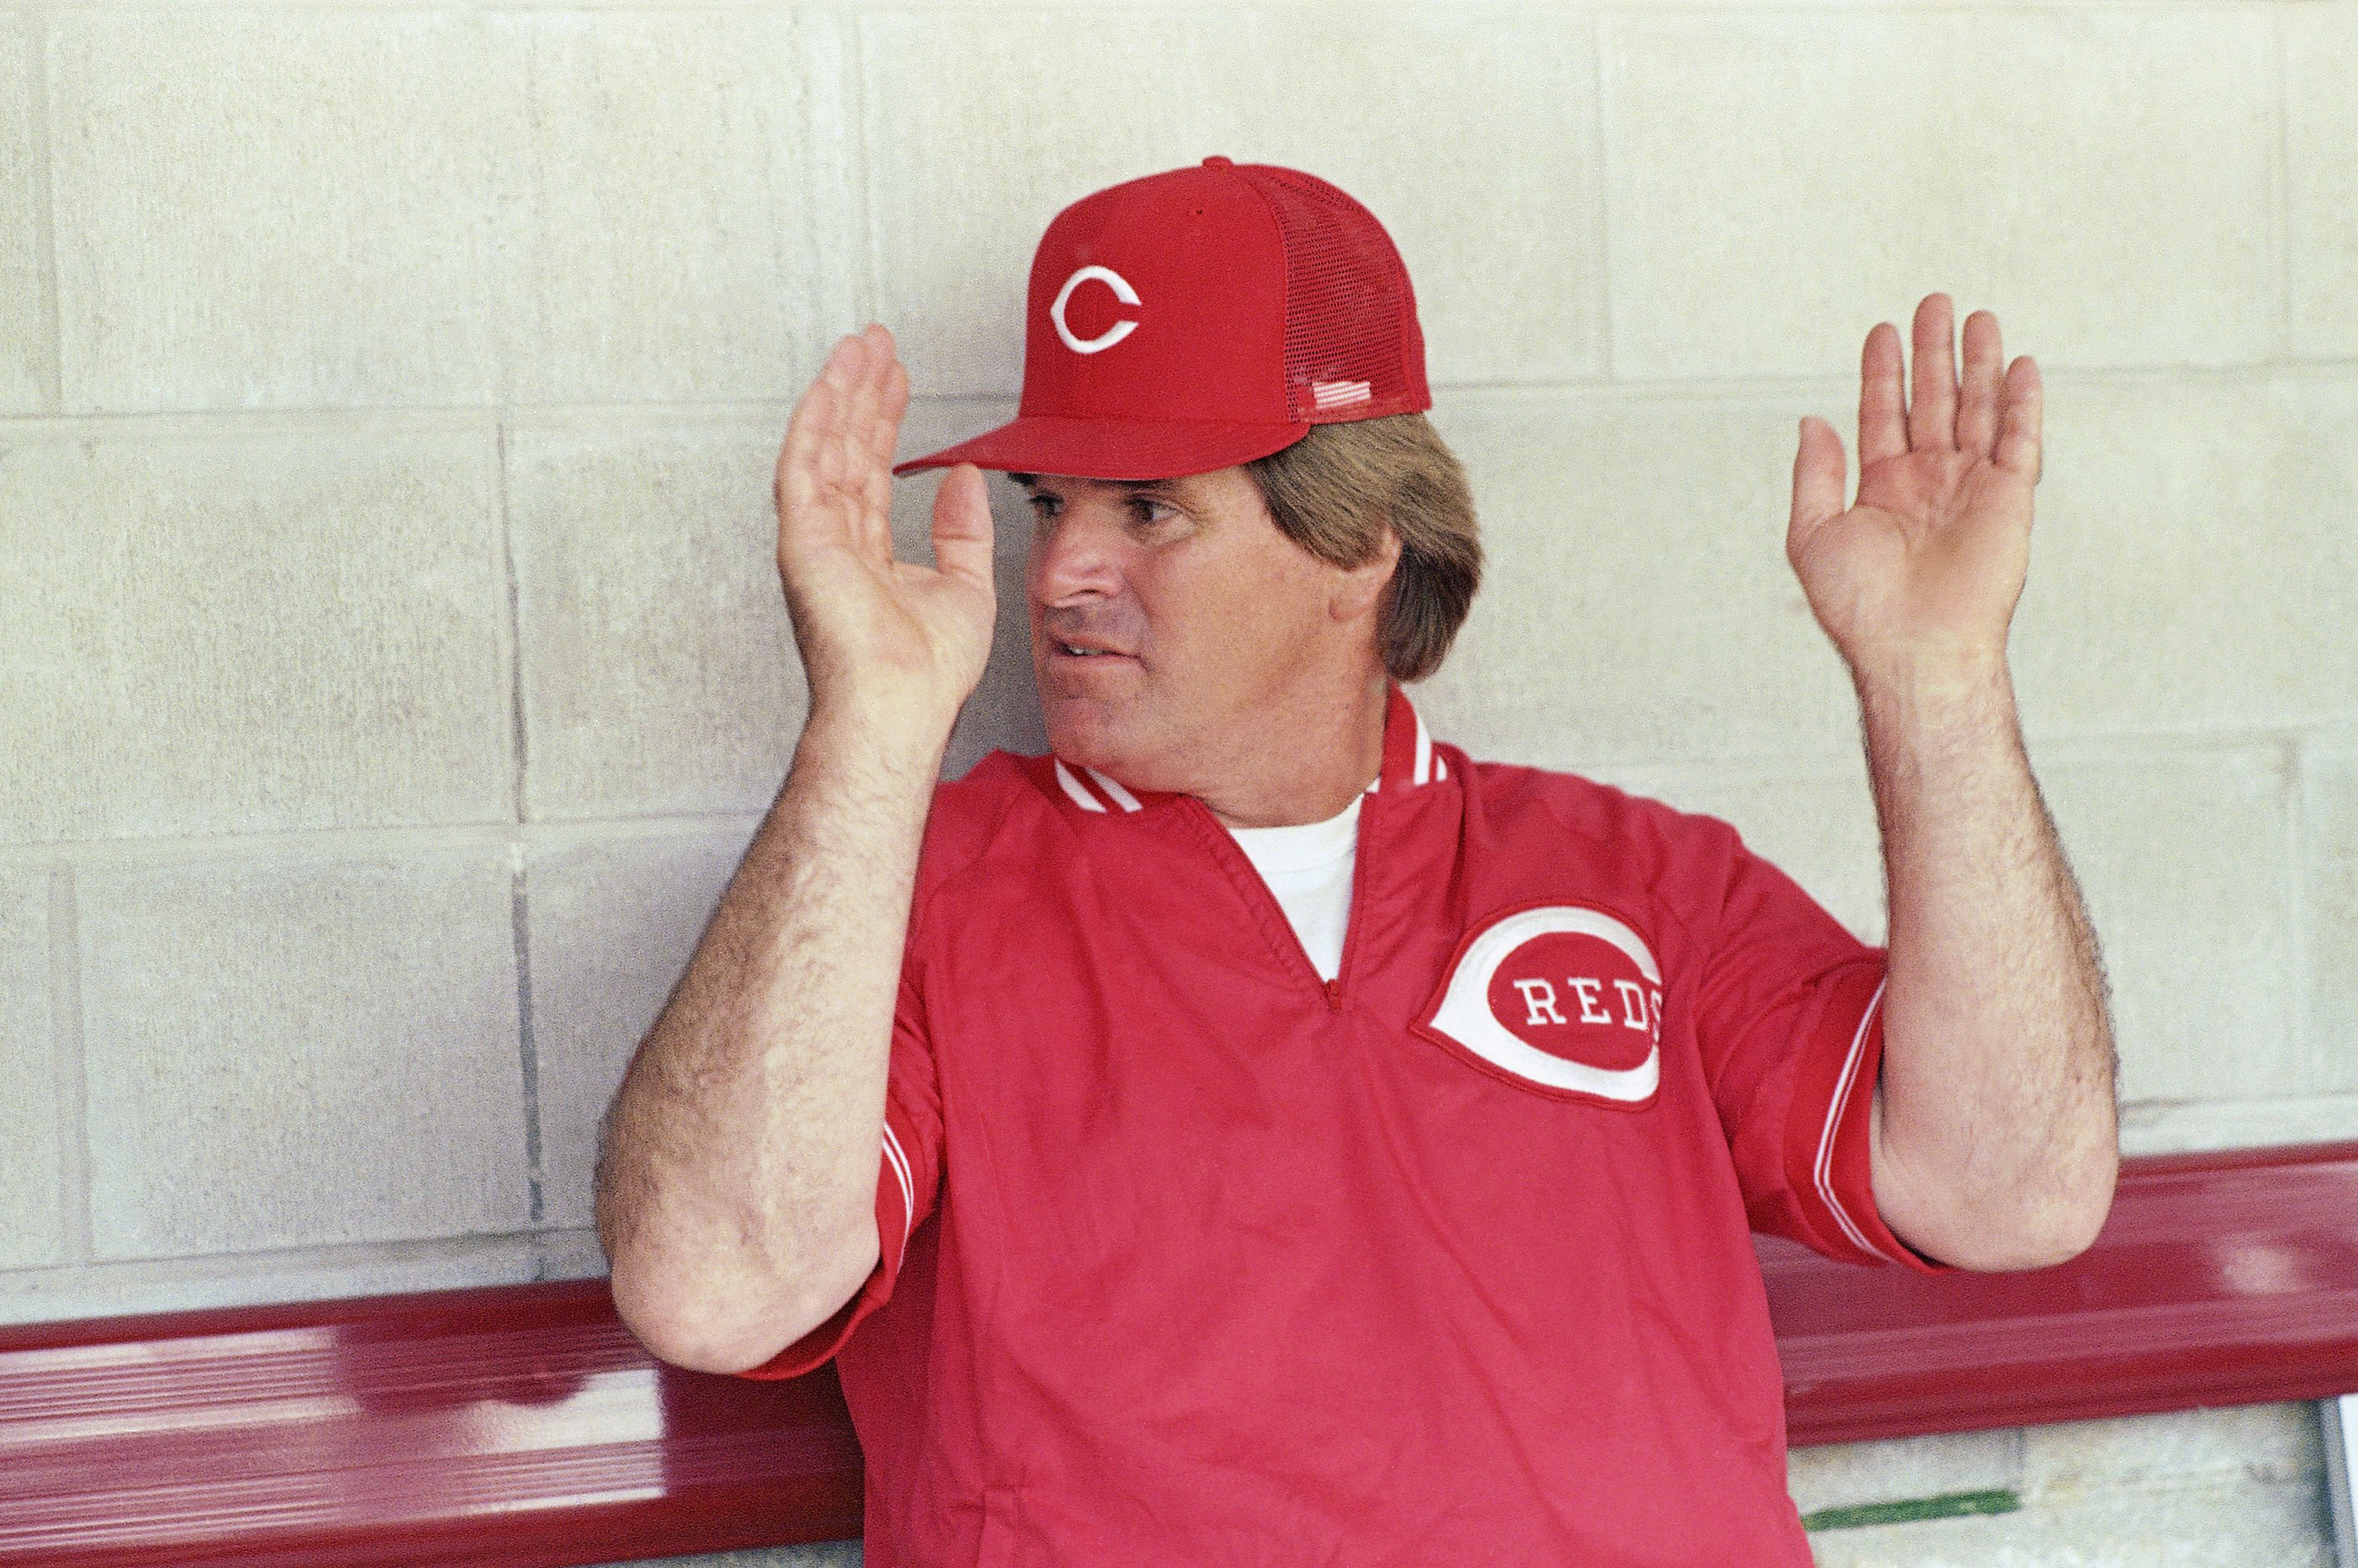 Pete Rose Enters the WWE Hall of Fame